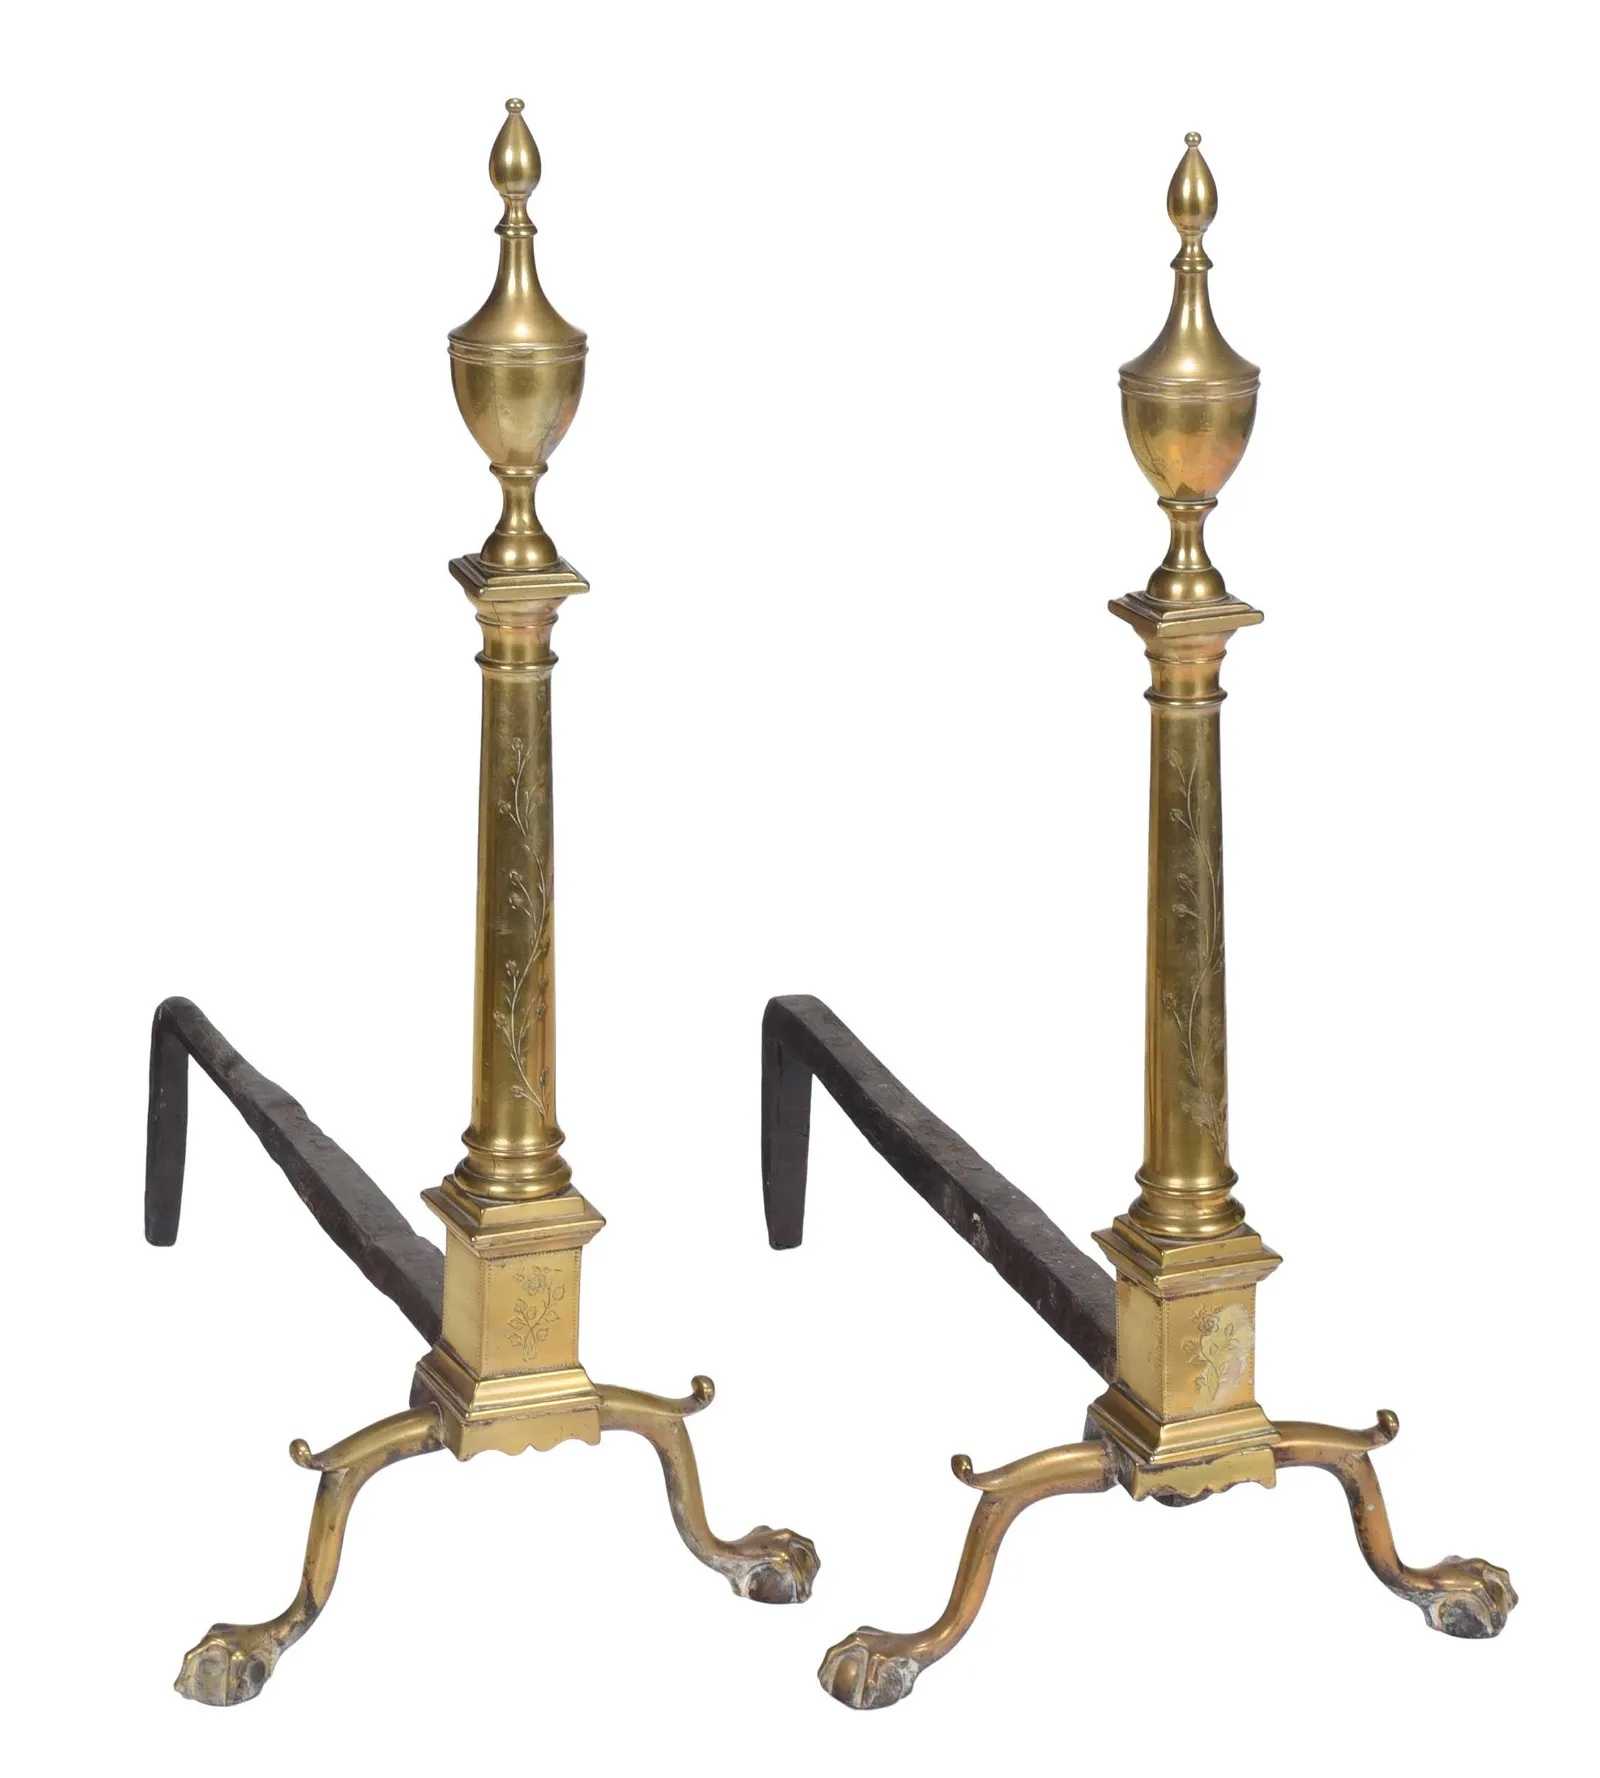 Circa 1790-1810 set of brass andirons, which sold for $32,000 ($40,960 with buyer’s premium) at Brunk.